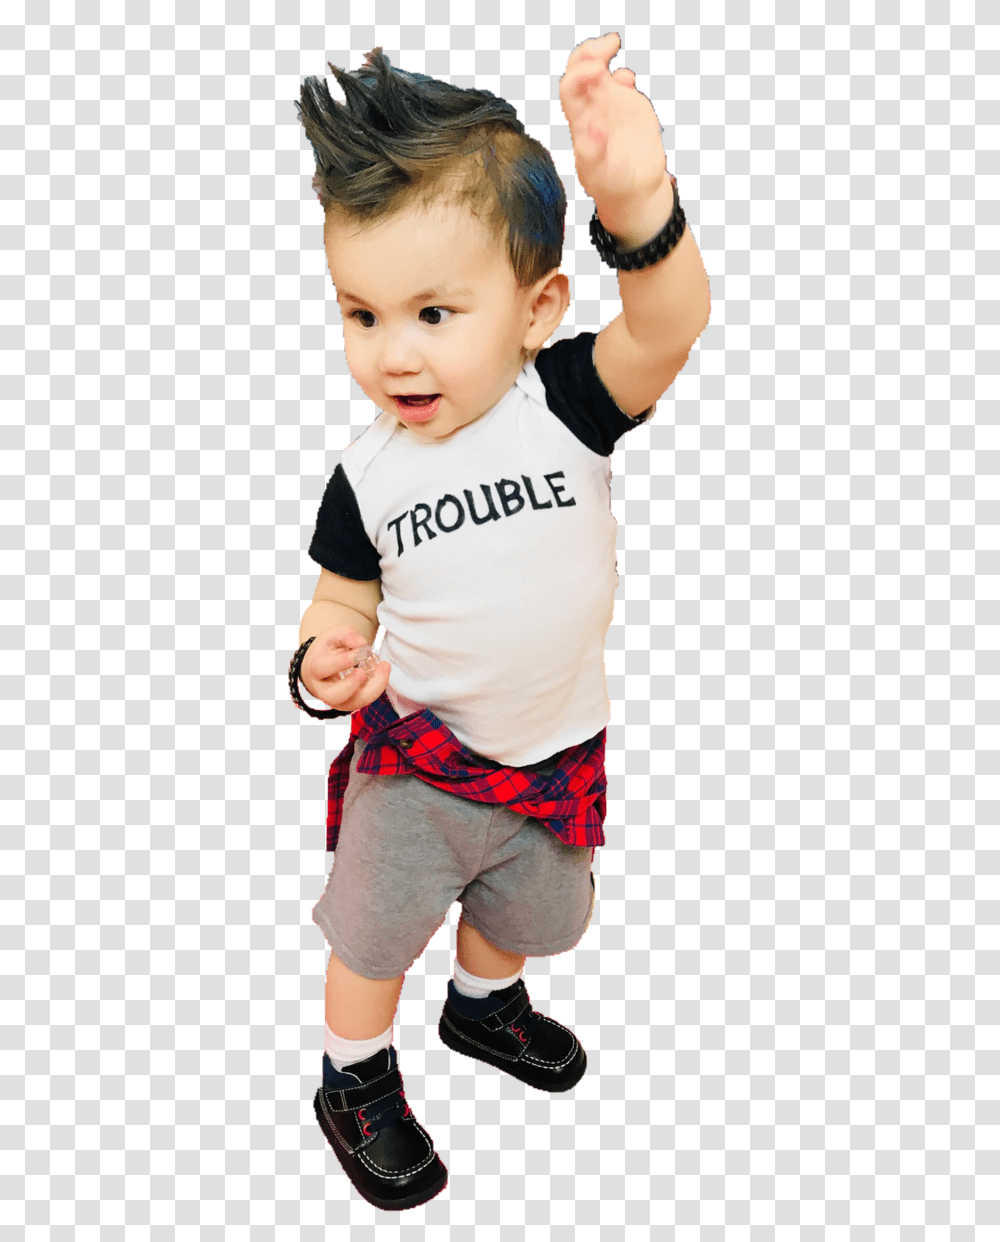 Punk Boi Is An Ultra Rare Lol Surprise Doll That Is Lol Surprise Boys Series New, Person, Shoe, Shorts Transparent Png